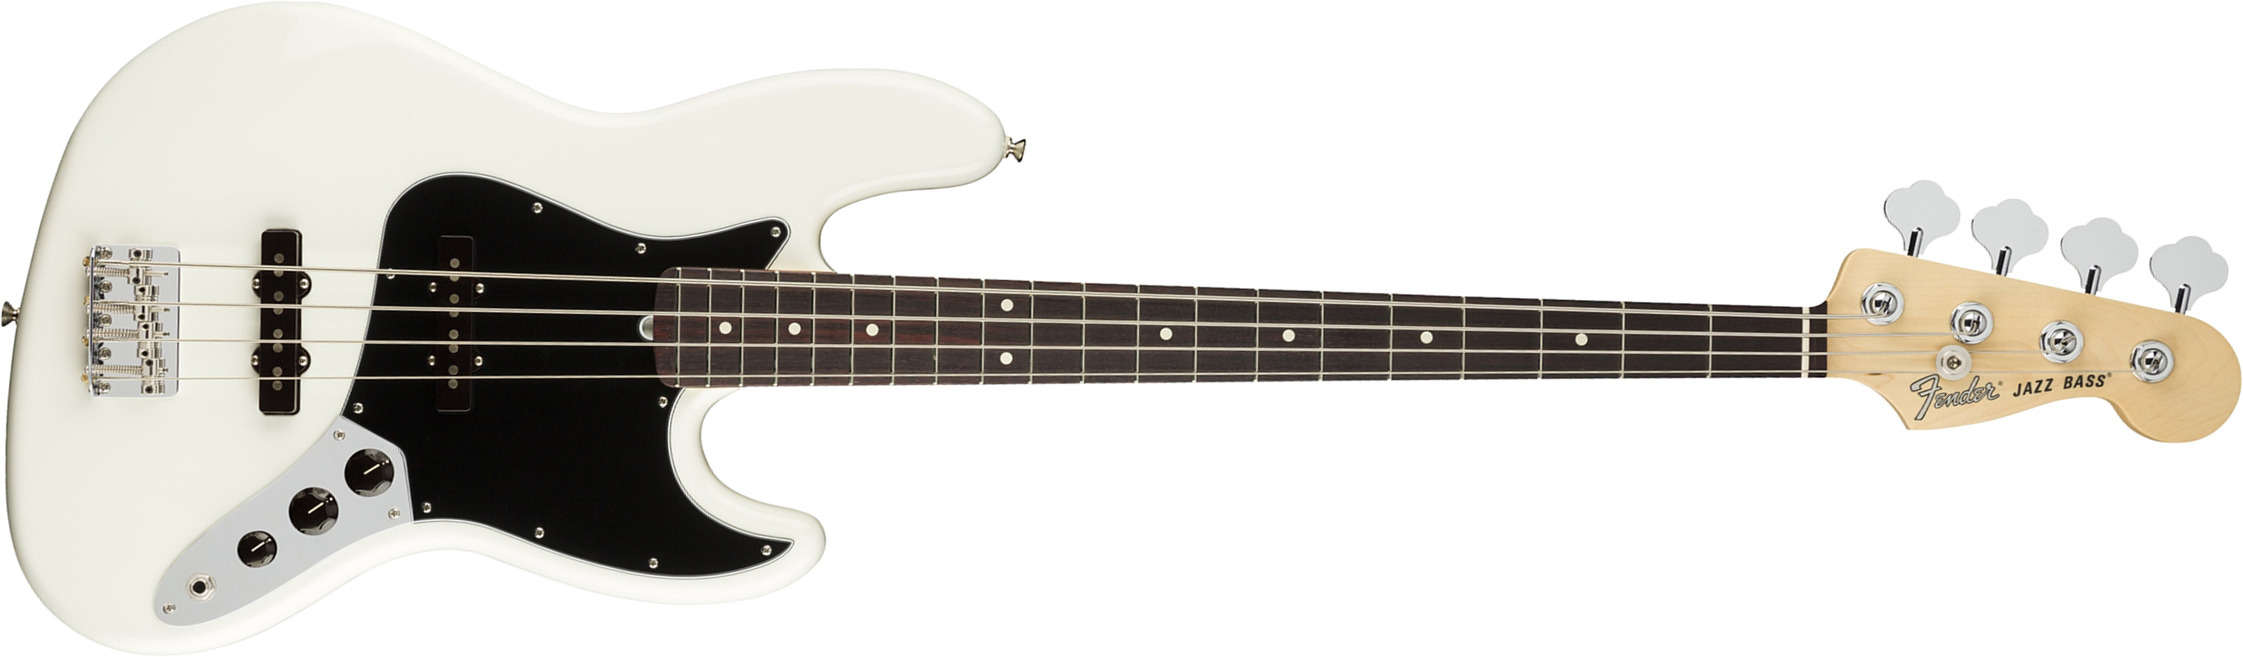 Fender Jazz Bass American Performer Usa Rw - Arctic White - Solidbody E-bass - Main picture